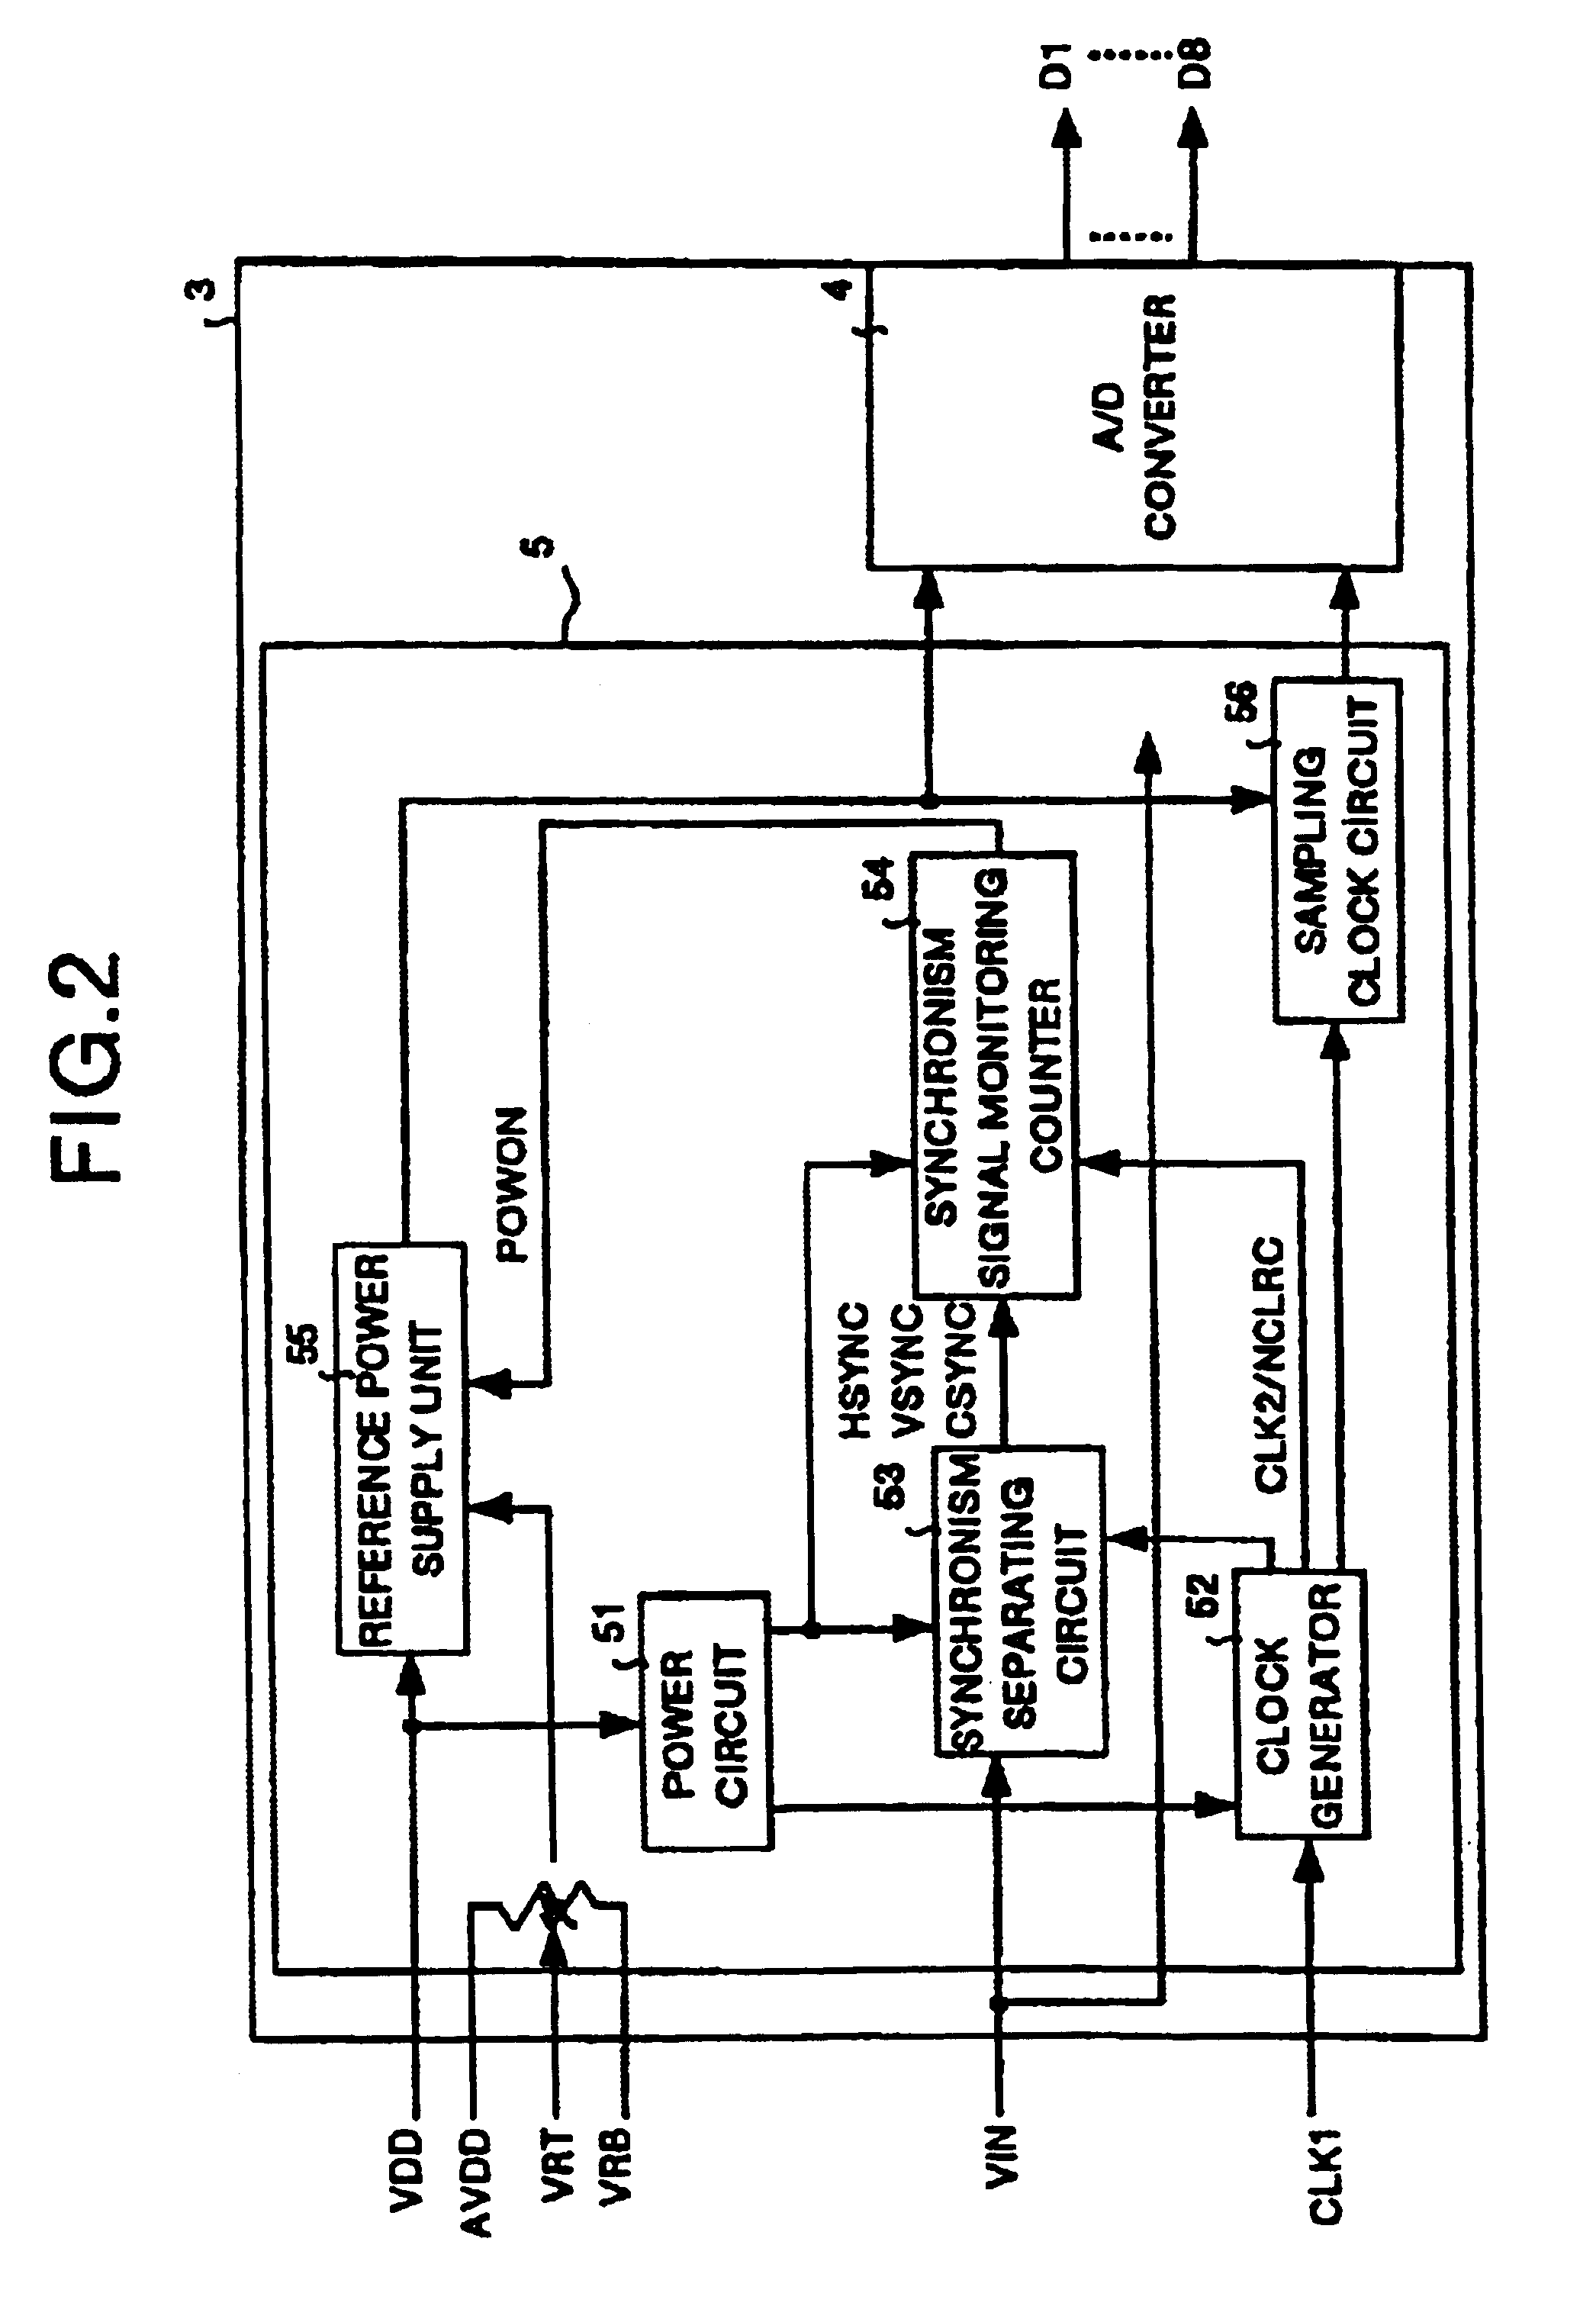 Video signal processing circuit and computer system